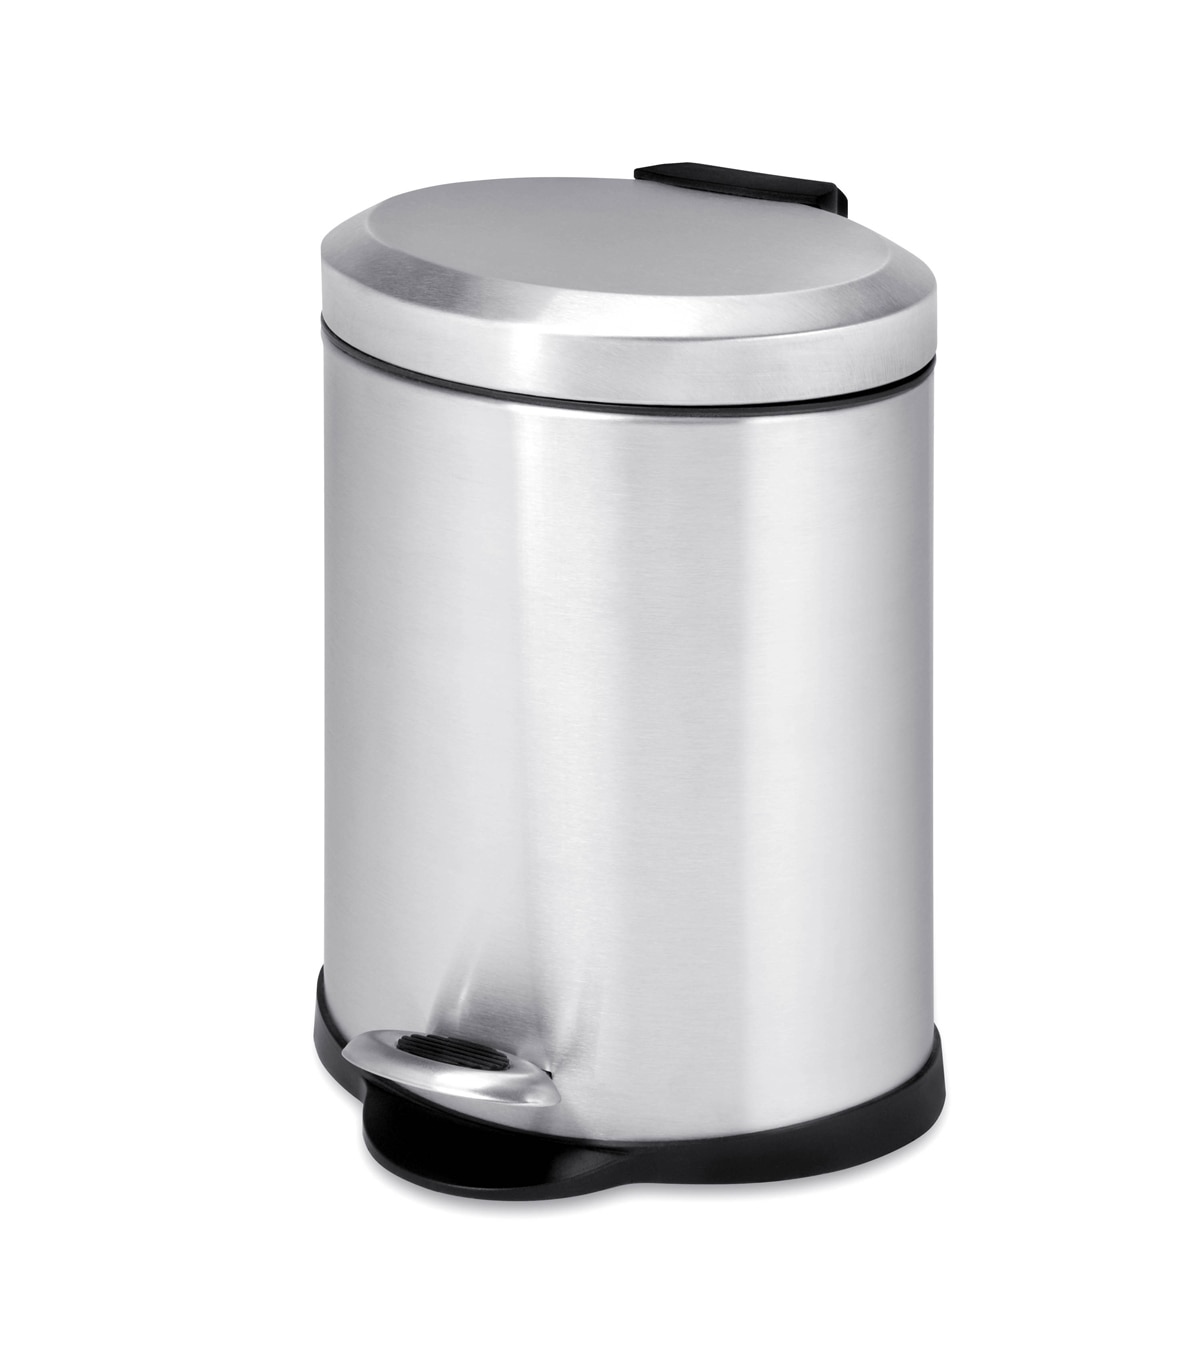 Honey Can Do 5L Oval Stainless Steel Step Can | JOANN